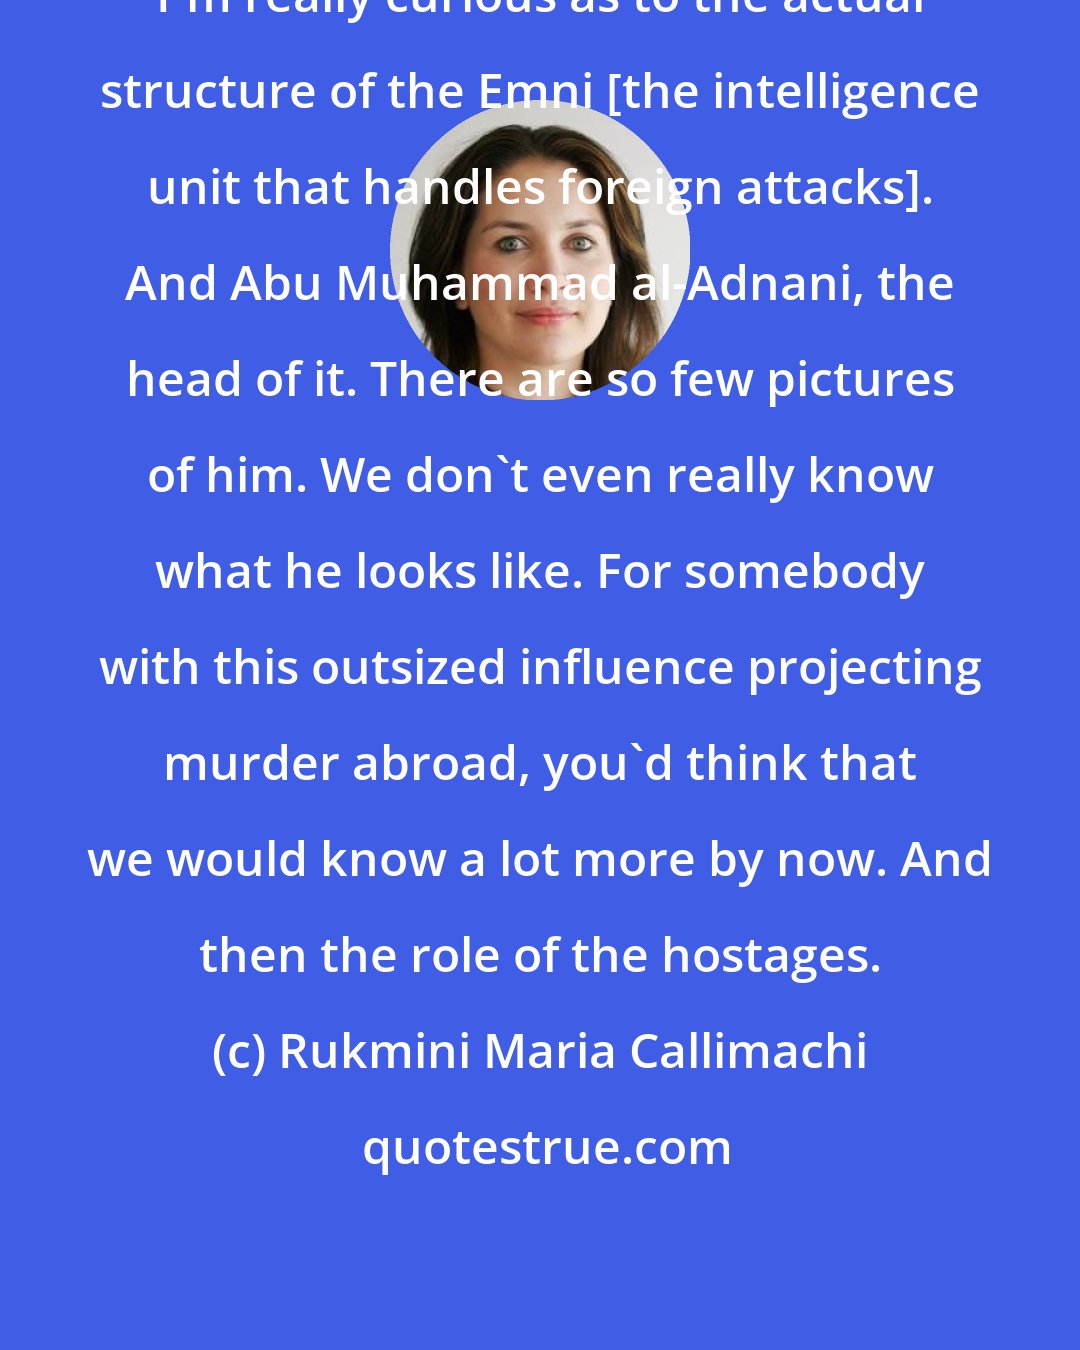 Rukmini Maria Callimachi: I'm really curious as to the actual structure of the Emni [the intelligence unit that handles foreign attacks]. And Abu Muhammad al-Adnani, the head of it. There are so few pictures of him. We don't even really know what he looks like. For somebody with this outsized influence projecting murder abroad, you'd think that we would know a lot more by now. And then the role of the hostages.